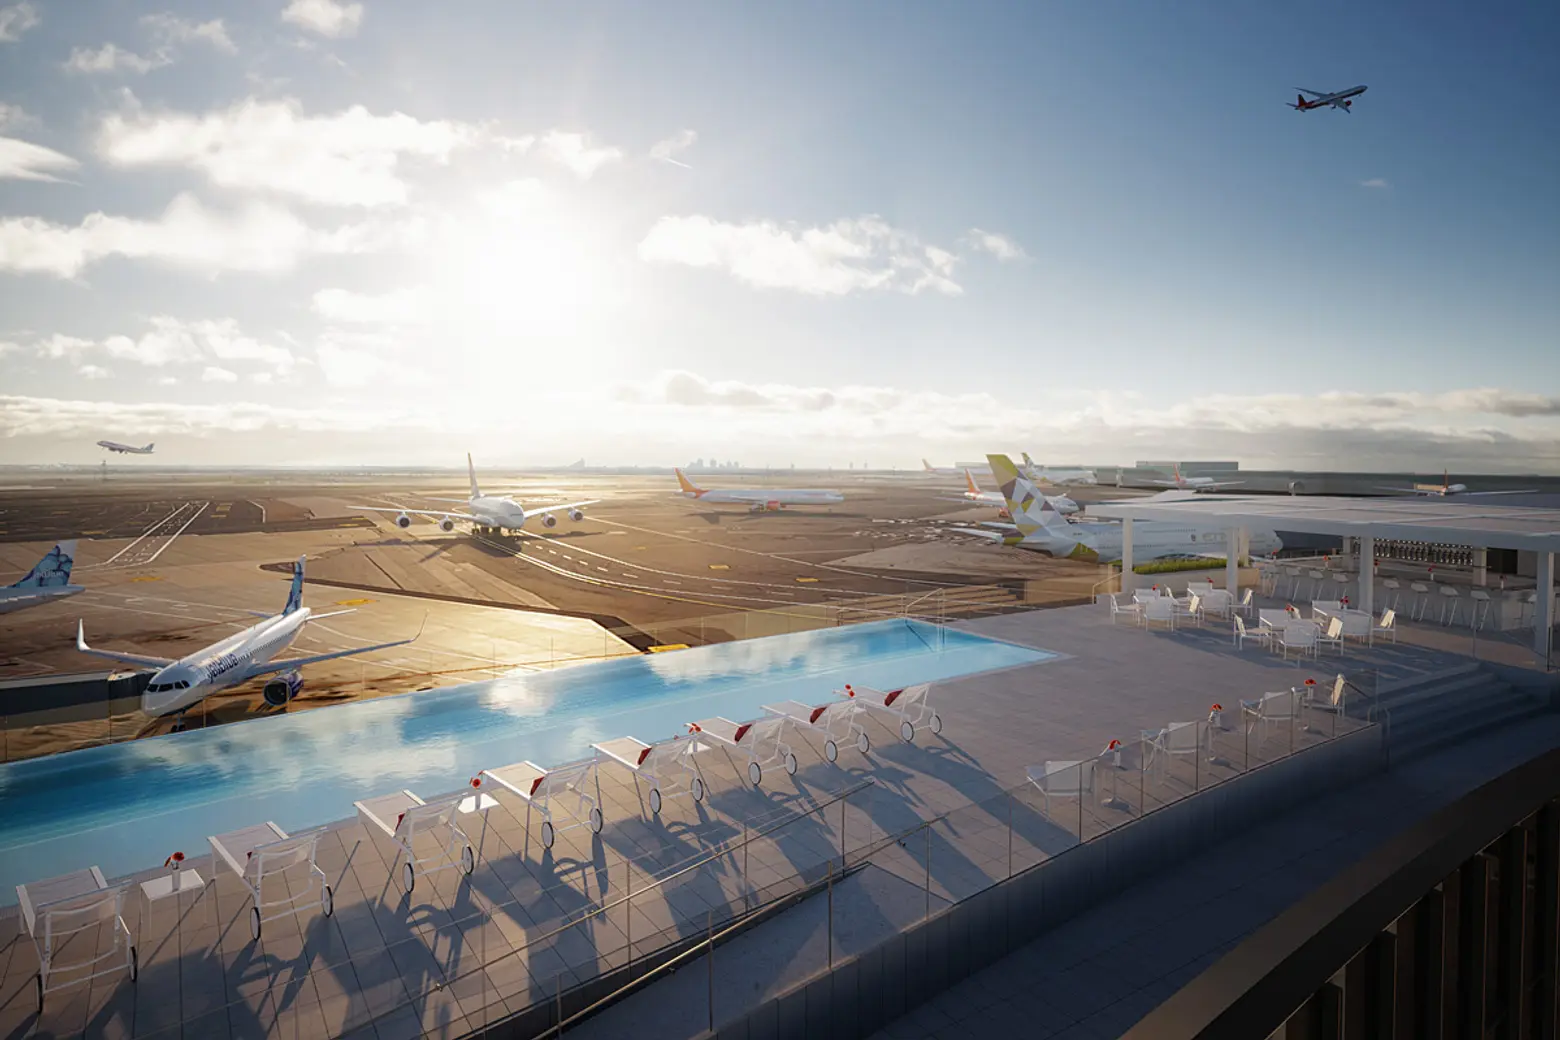 TWA Hotel reveals first look at rooftop infinity pool and observation deck